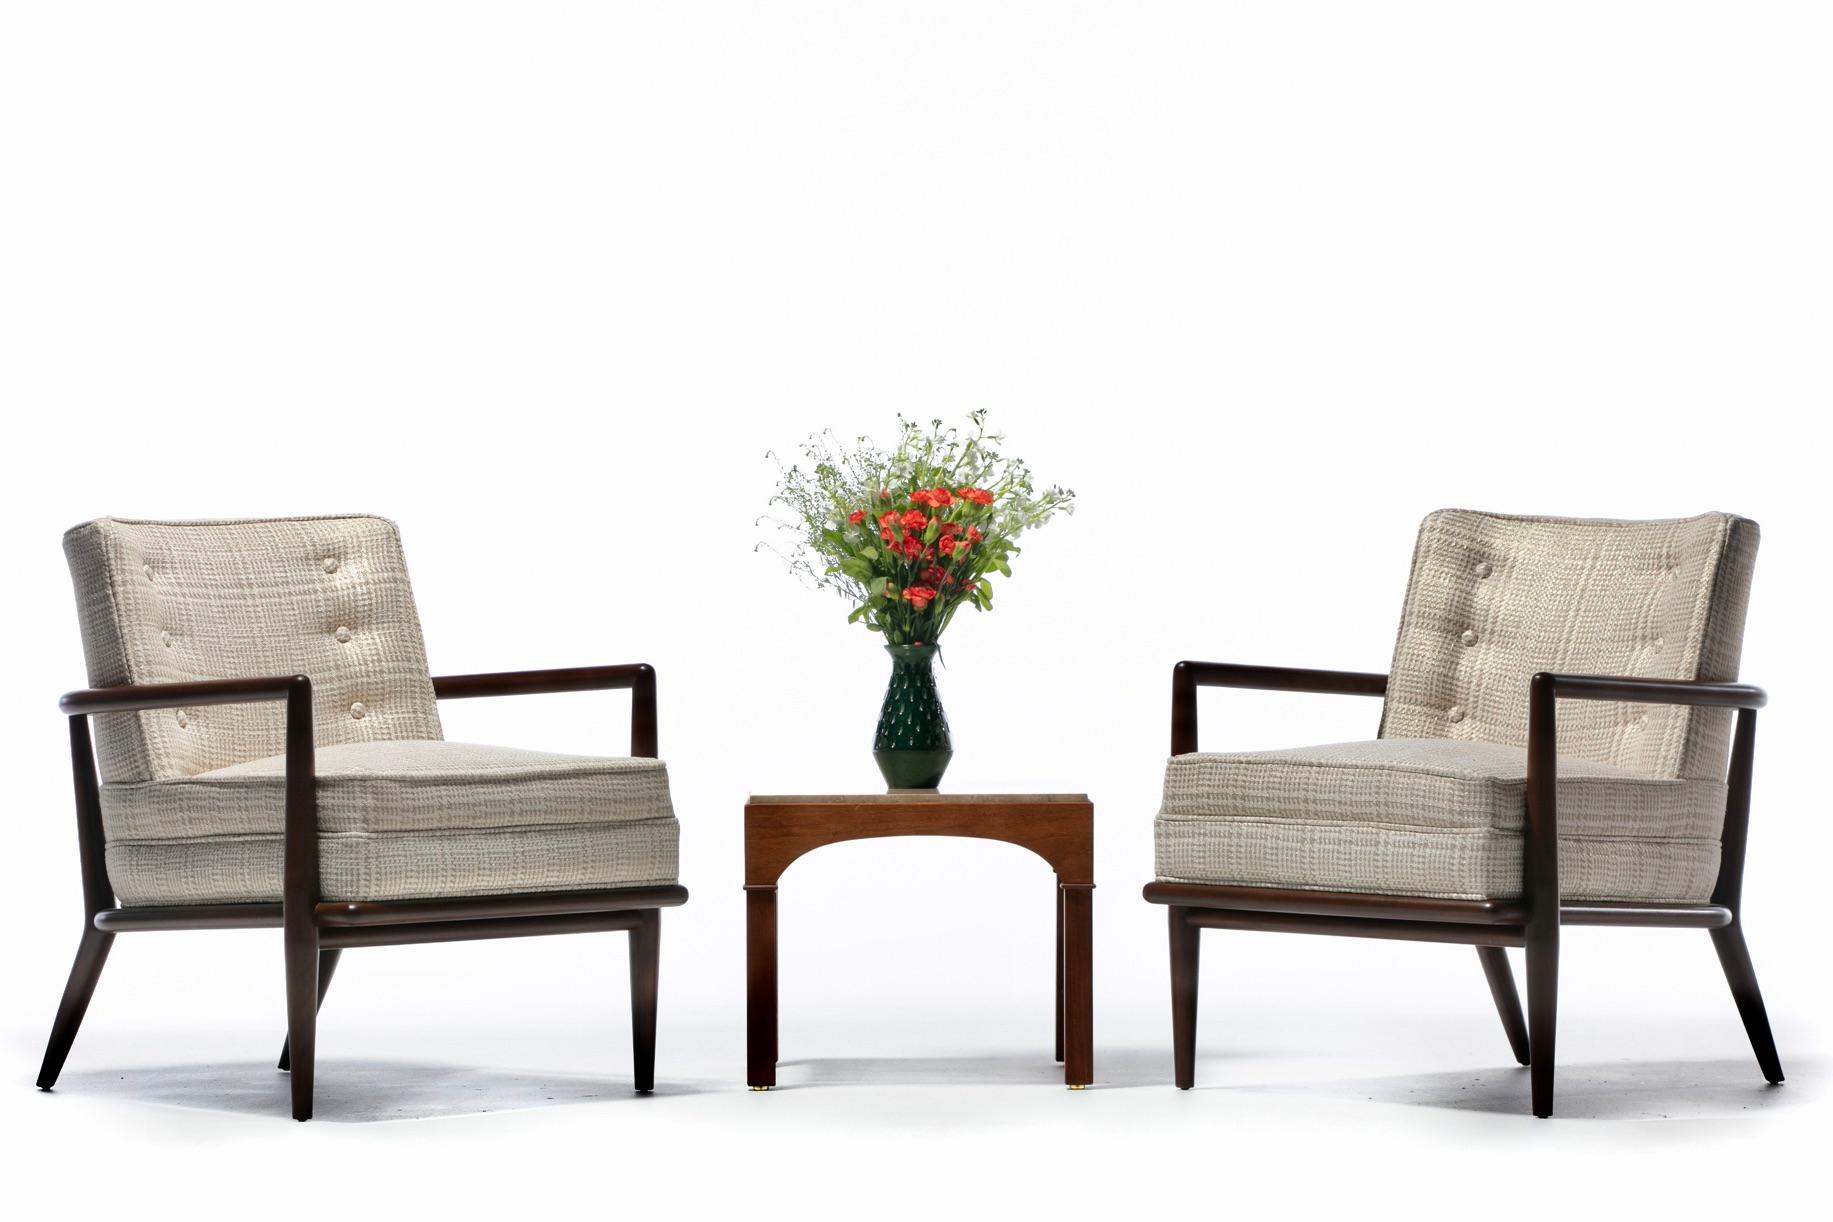 Pair of 1950s iconic walnut Lounge Chairs designed by T. H. Robsjohn-Gibbings and made by Widdicomb newly professionally refinished and reupholstered in designer Romo fabric. Sexy and refined. Classic Mid Century Modern silhouette that's timelessly